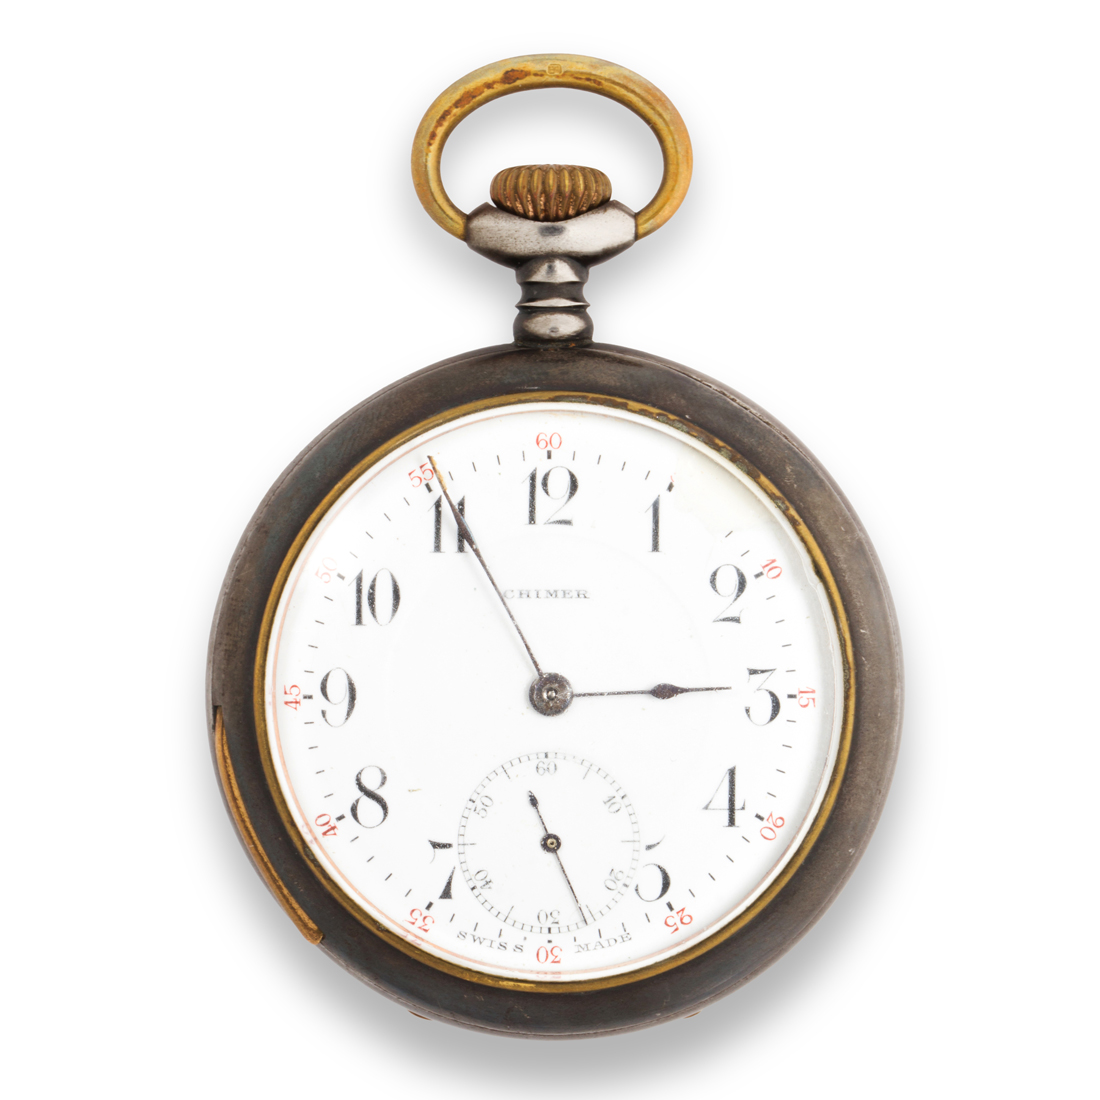 A GROUP OF POCKET WATCHES A group 3a1876